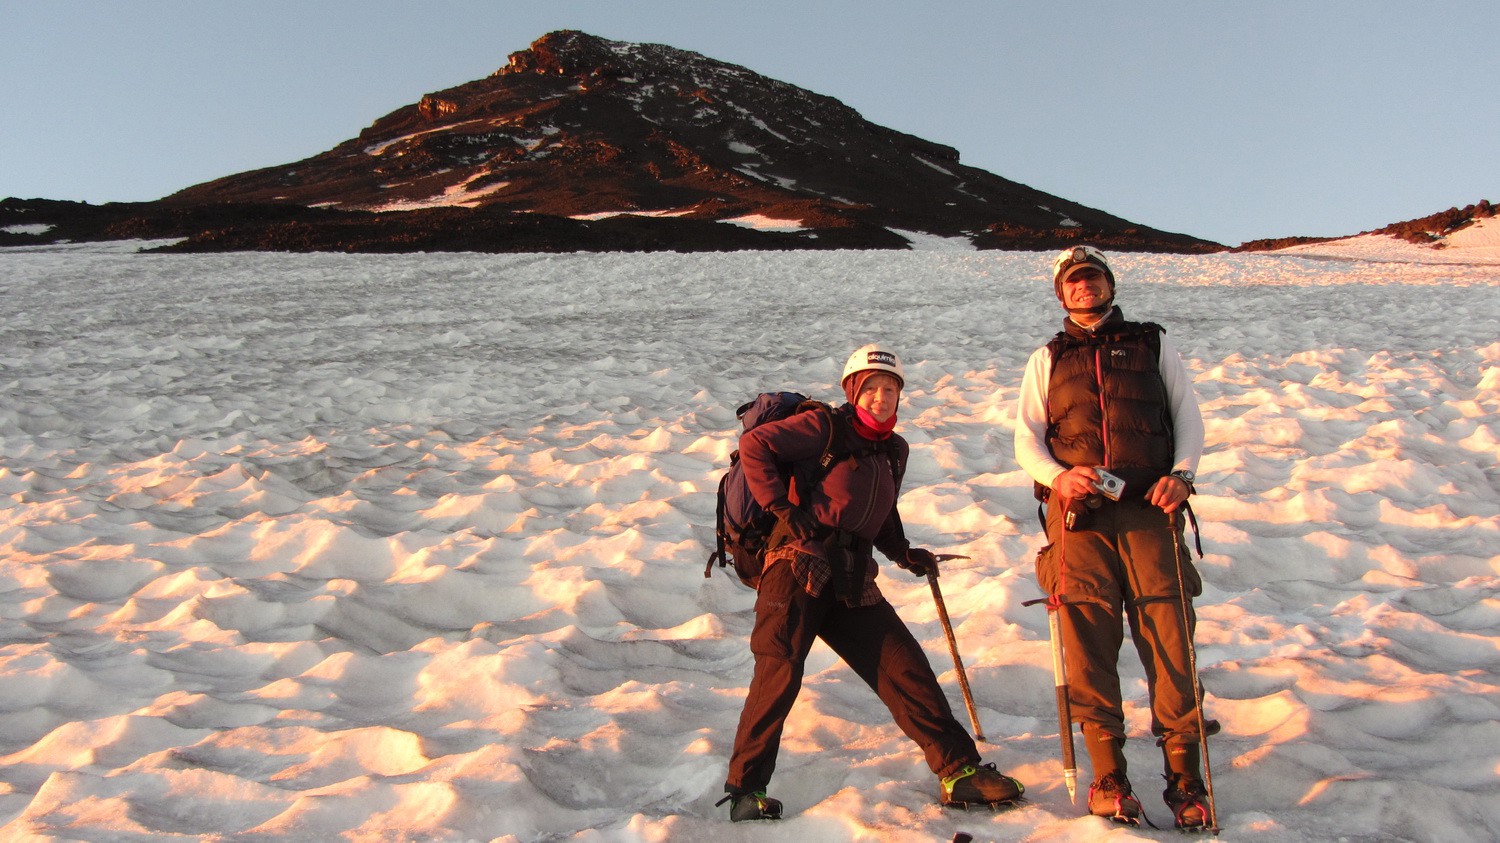 Marion and Leandro on the way to the summit of Volcan Lanin